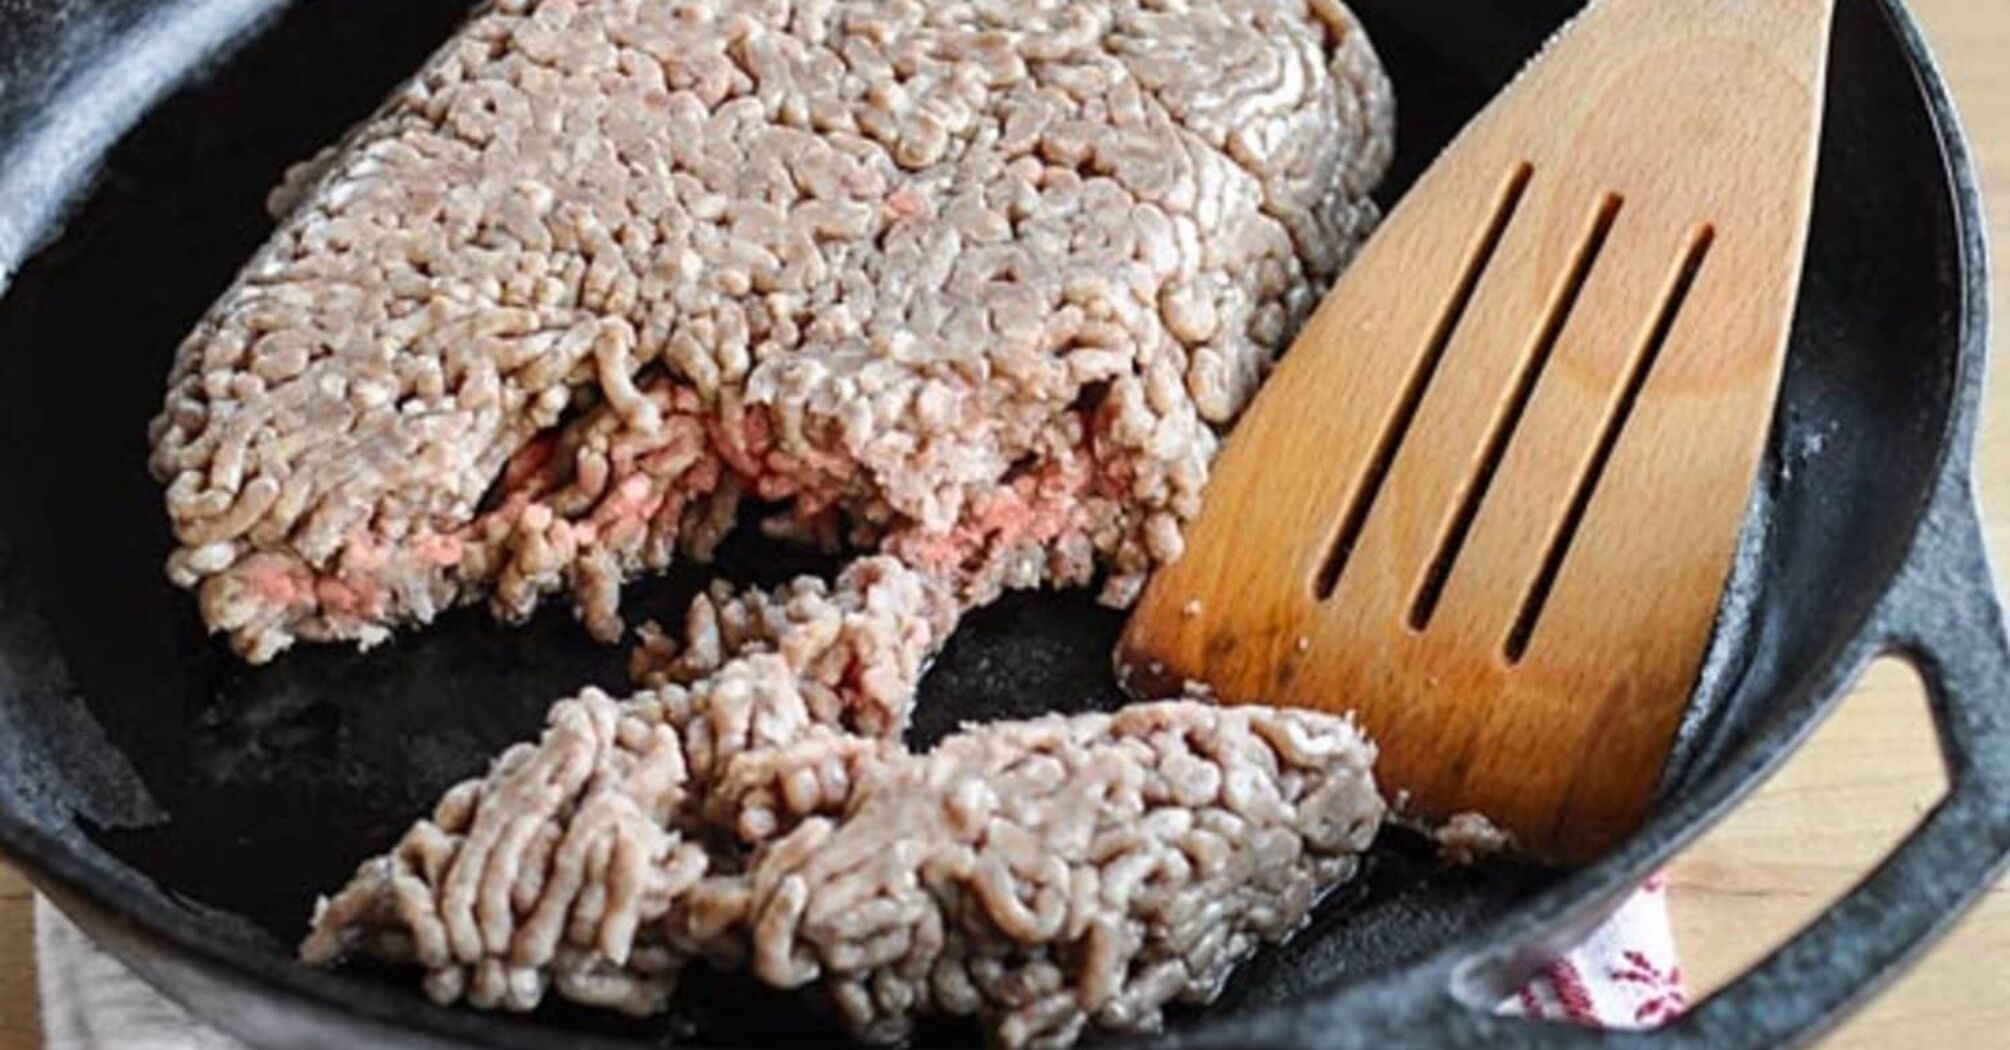 How to tell if ground meat has gone bad